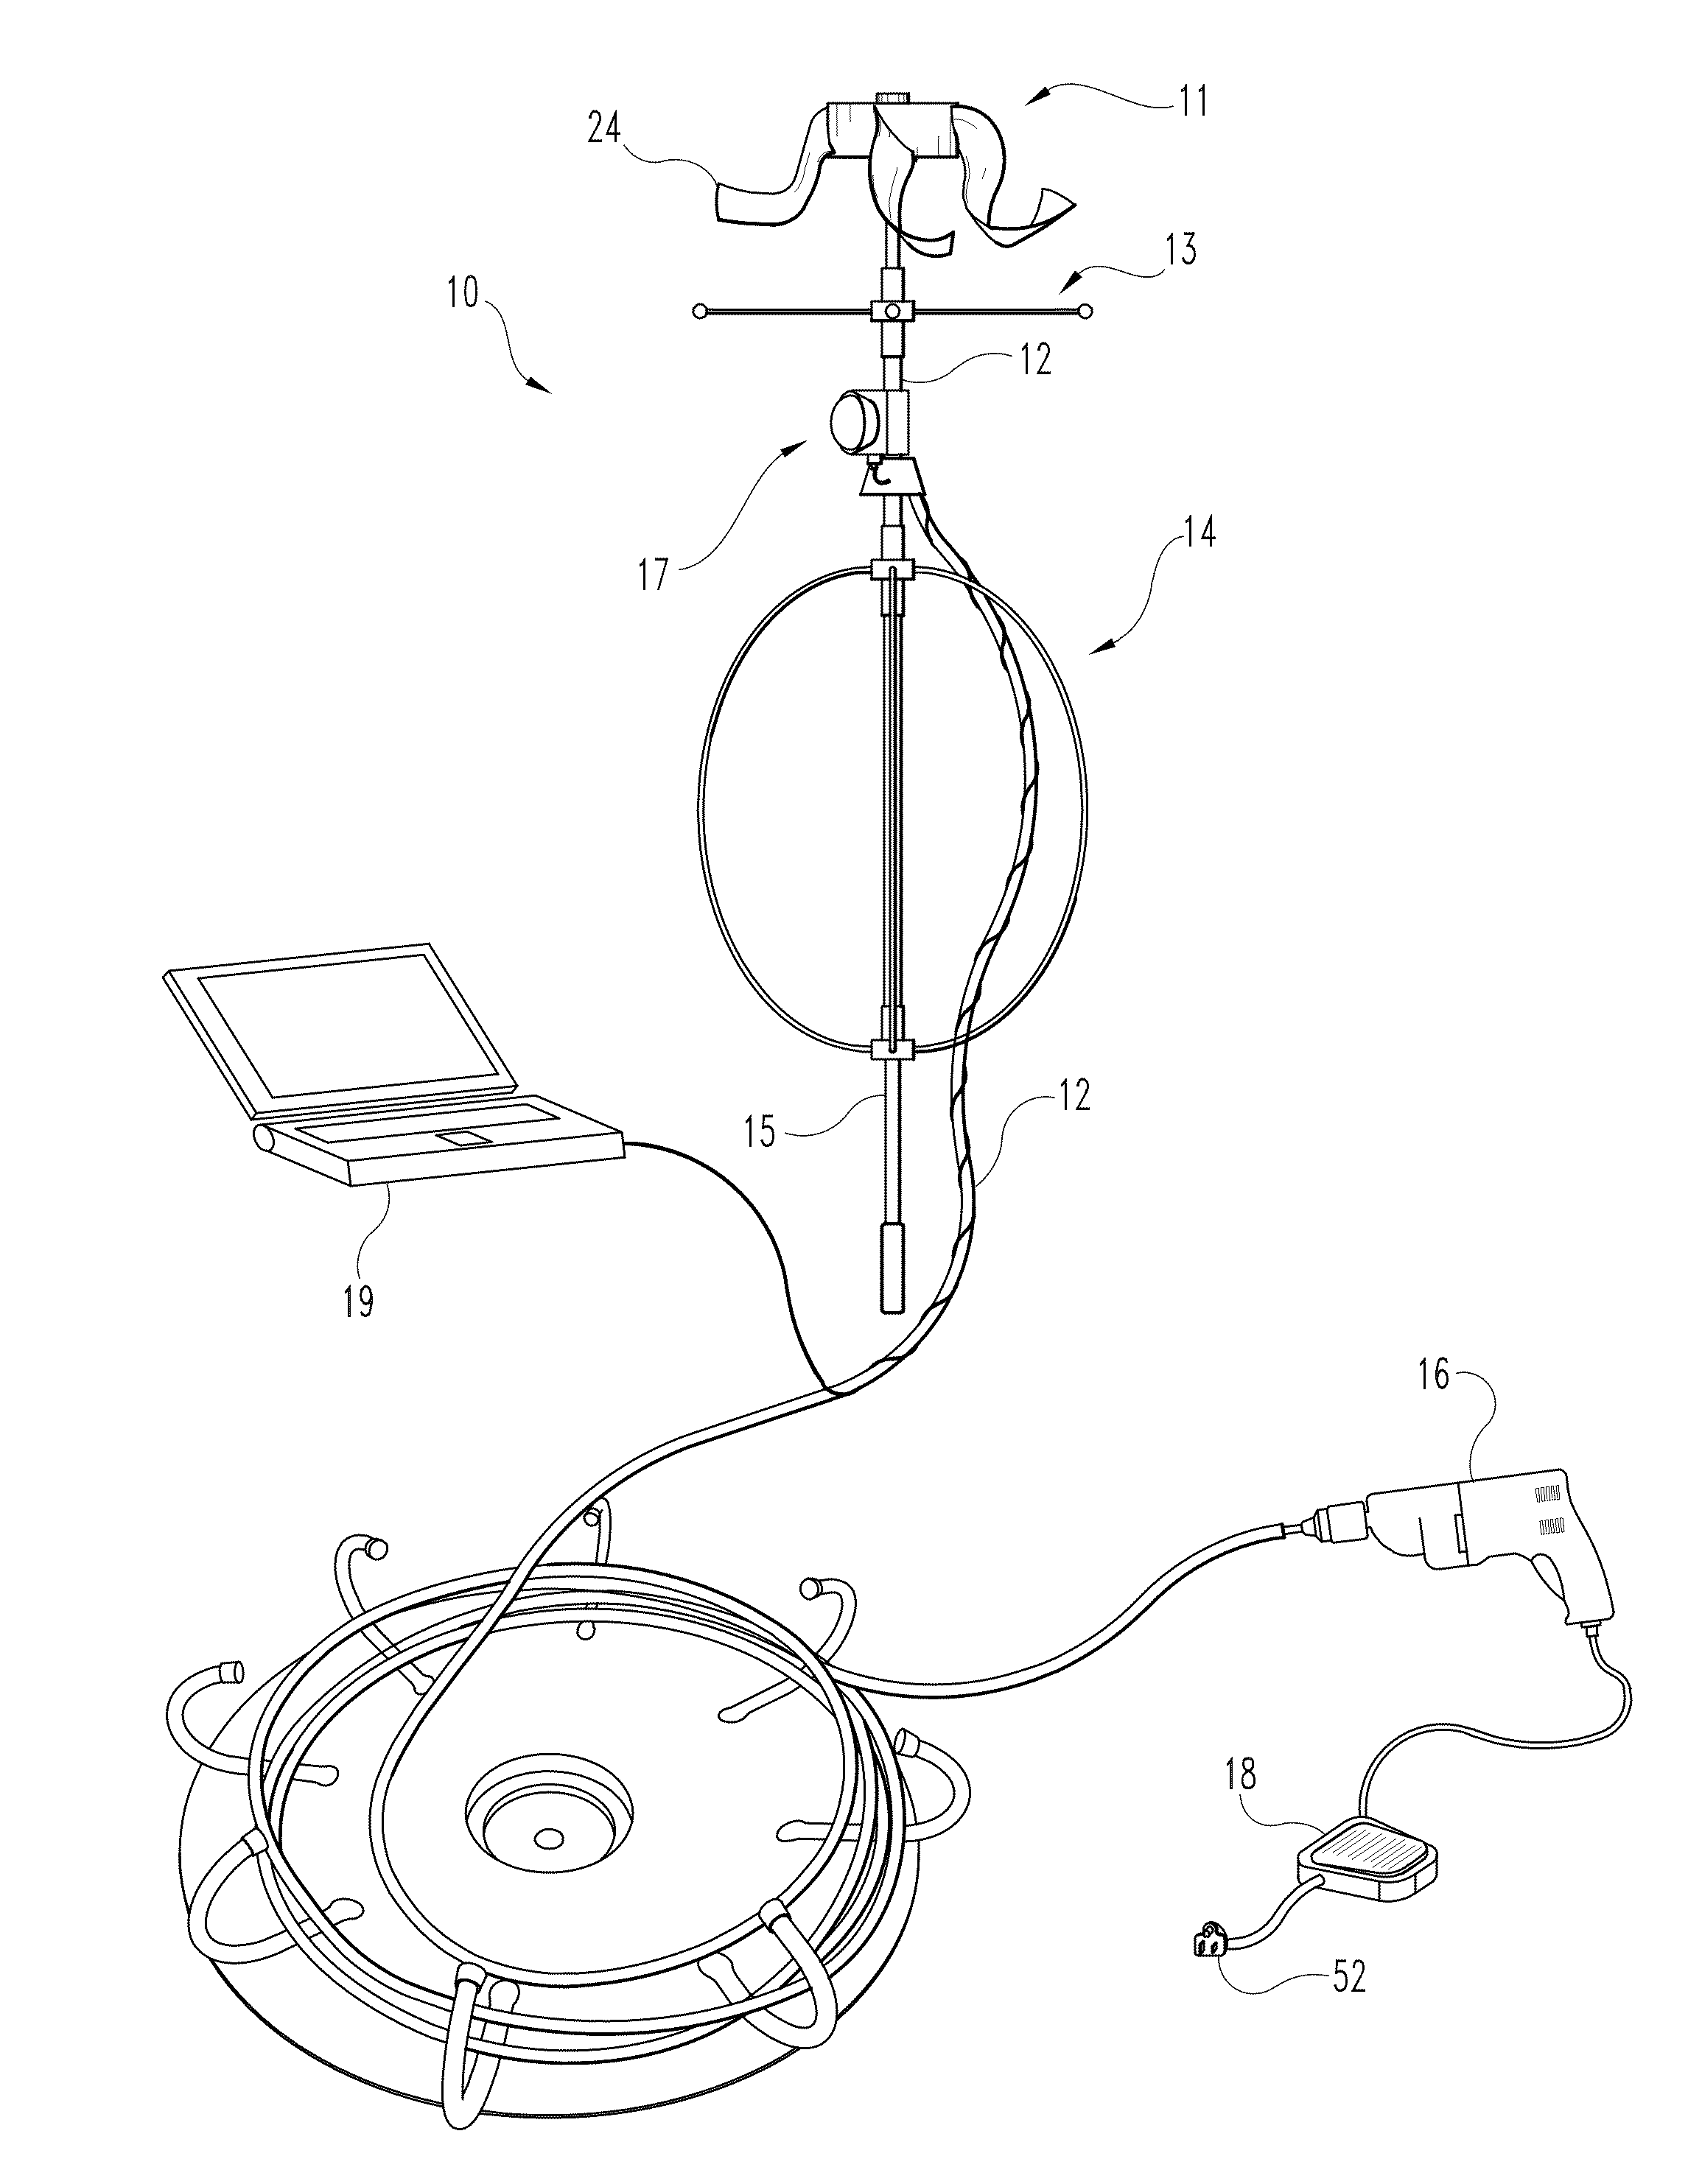 Device for cleaning and remotely inspecting a chimney